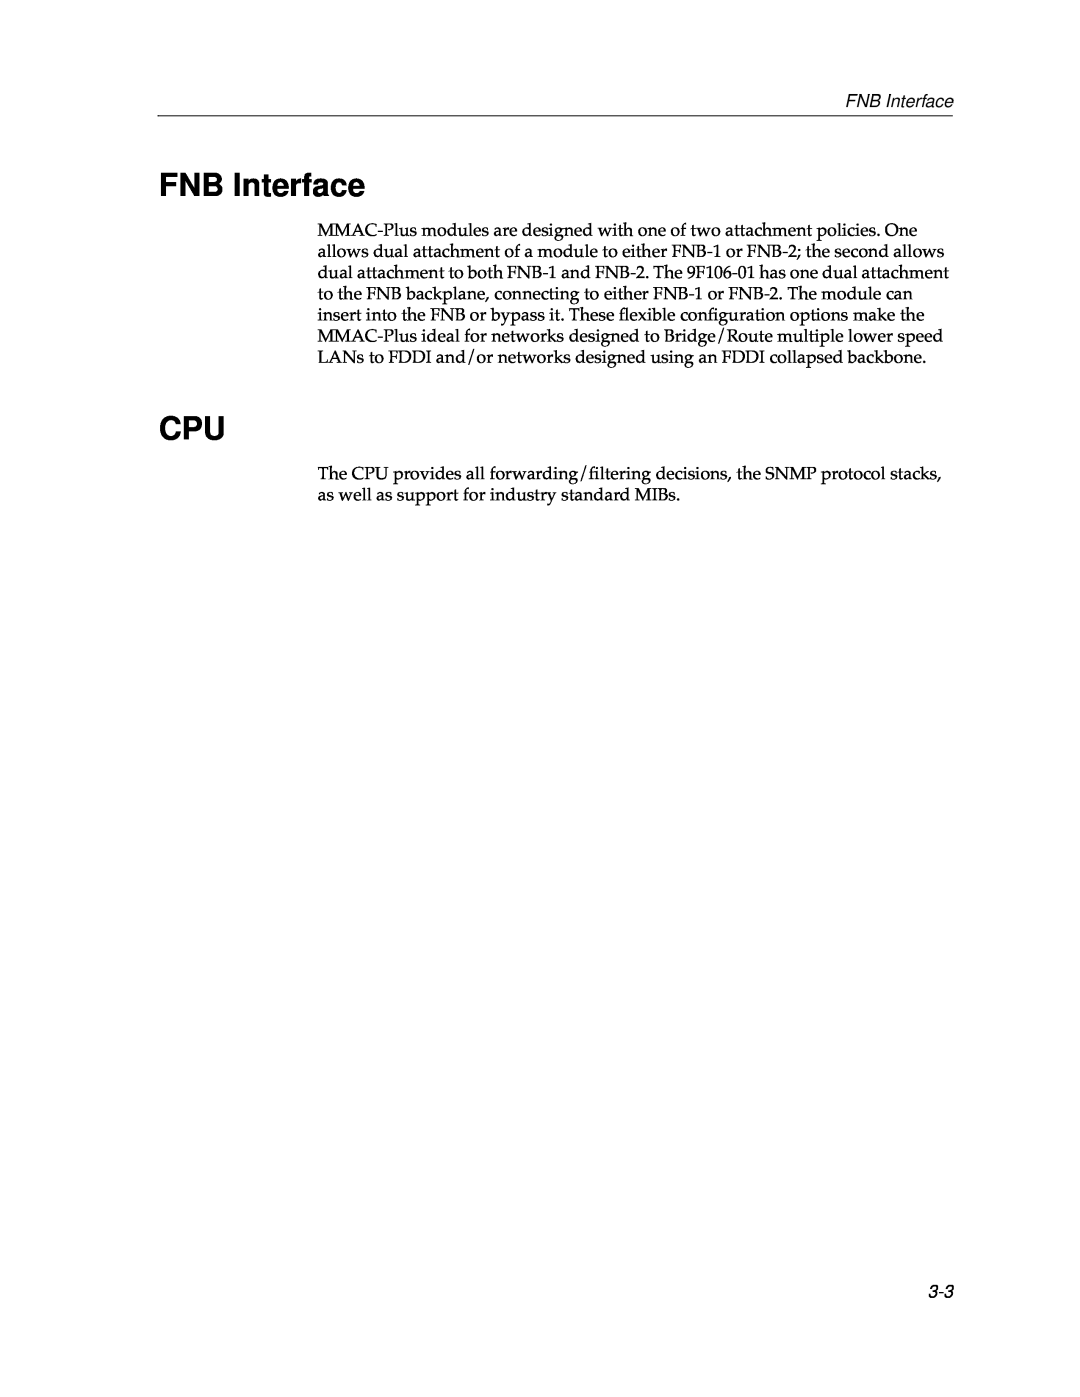 Cabletron Systems 9F106-01 manual FNB Interface 